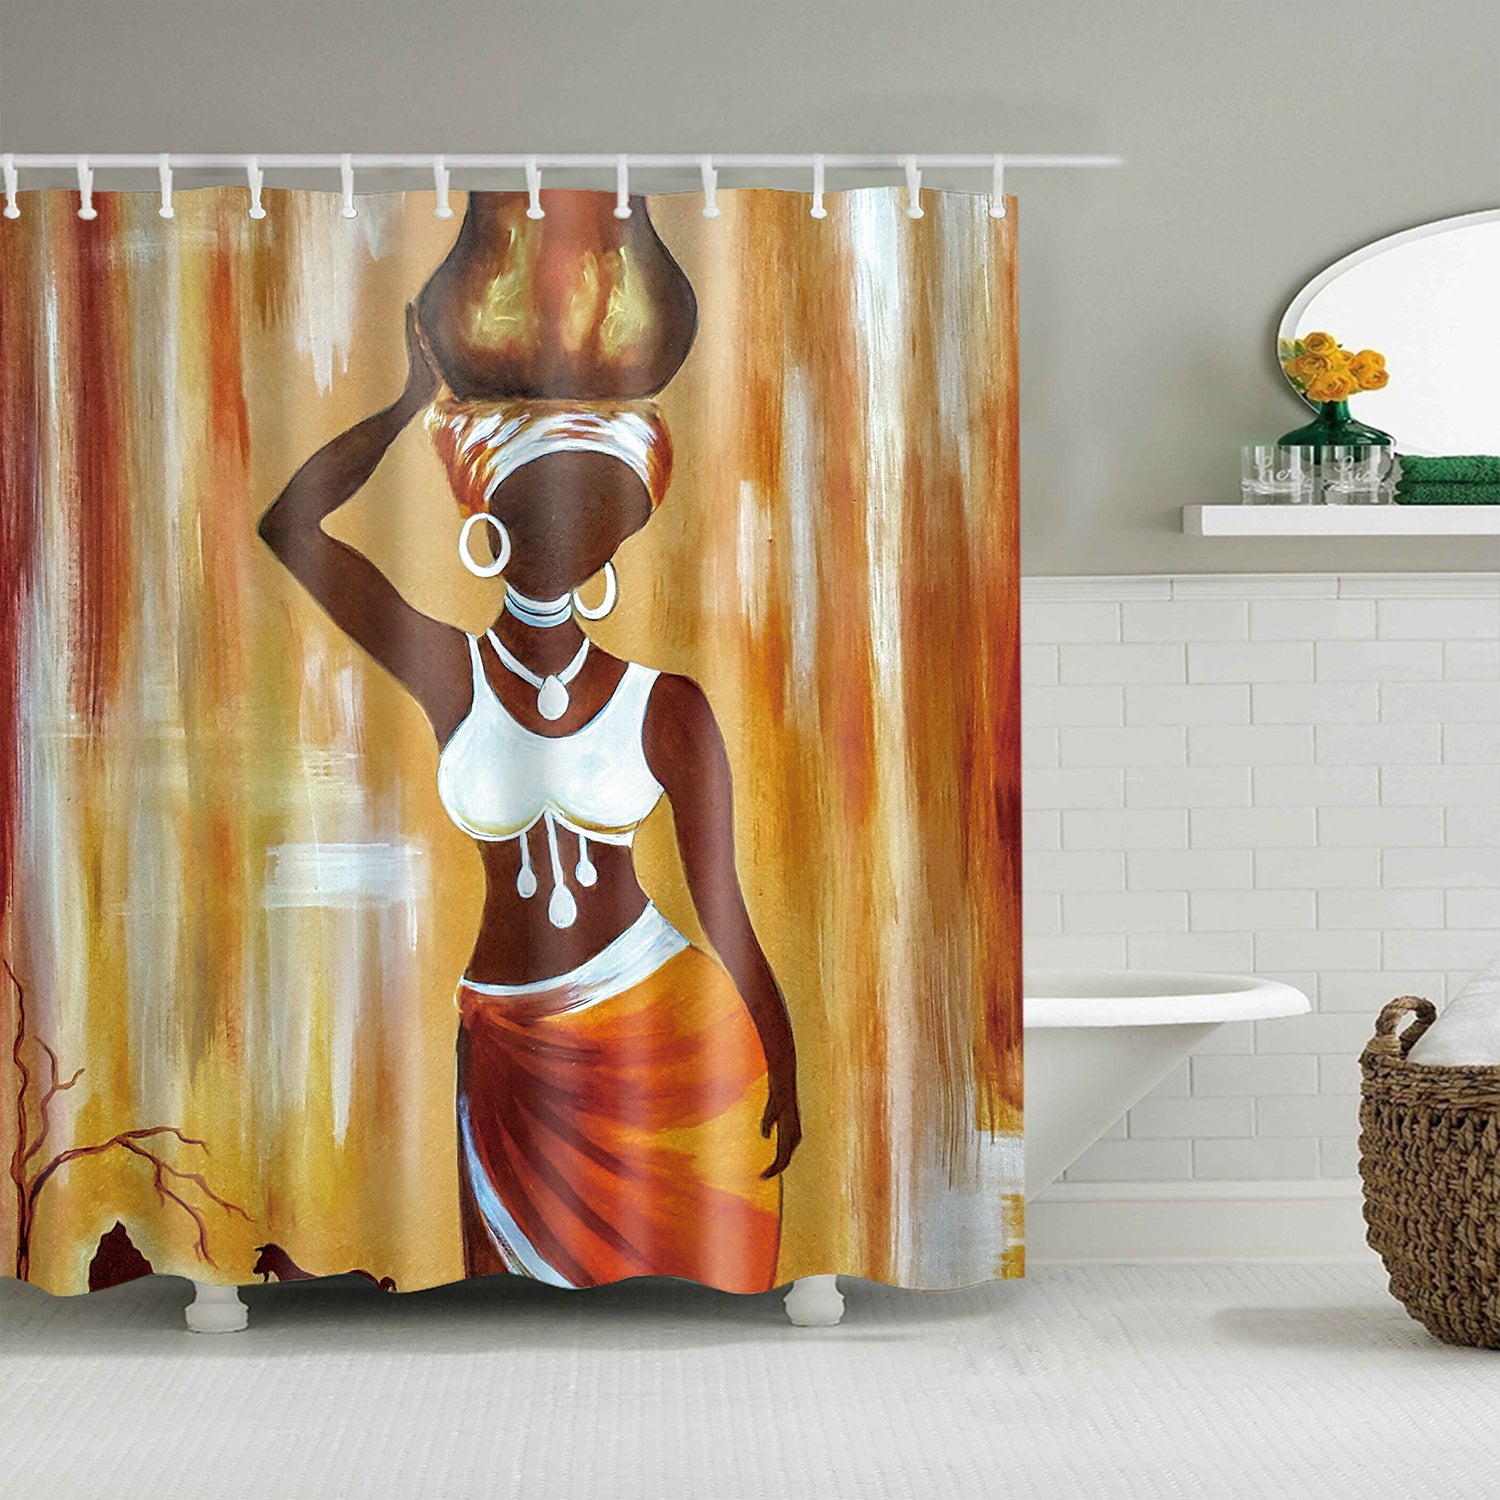 Fascinating African Egyption Art Woman Carrying Clay Pot Shower Curtain